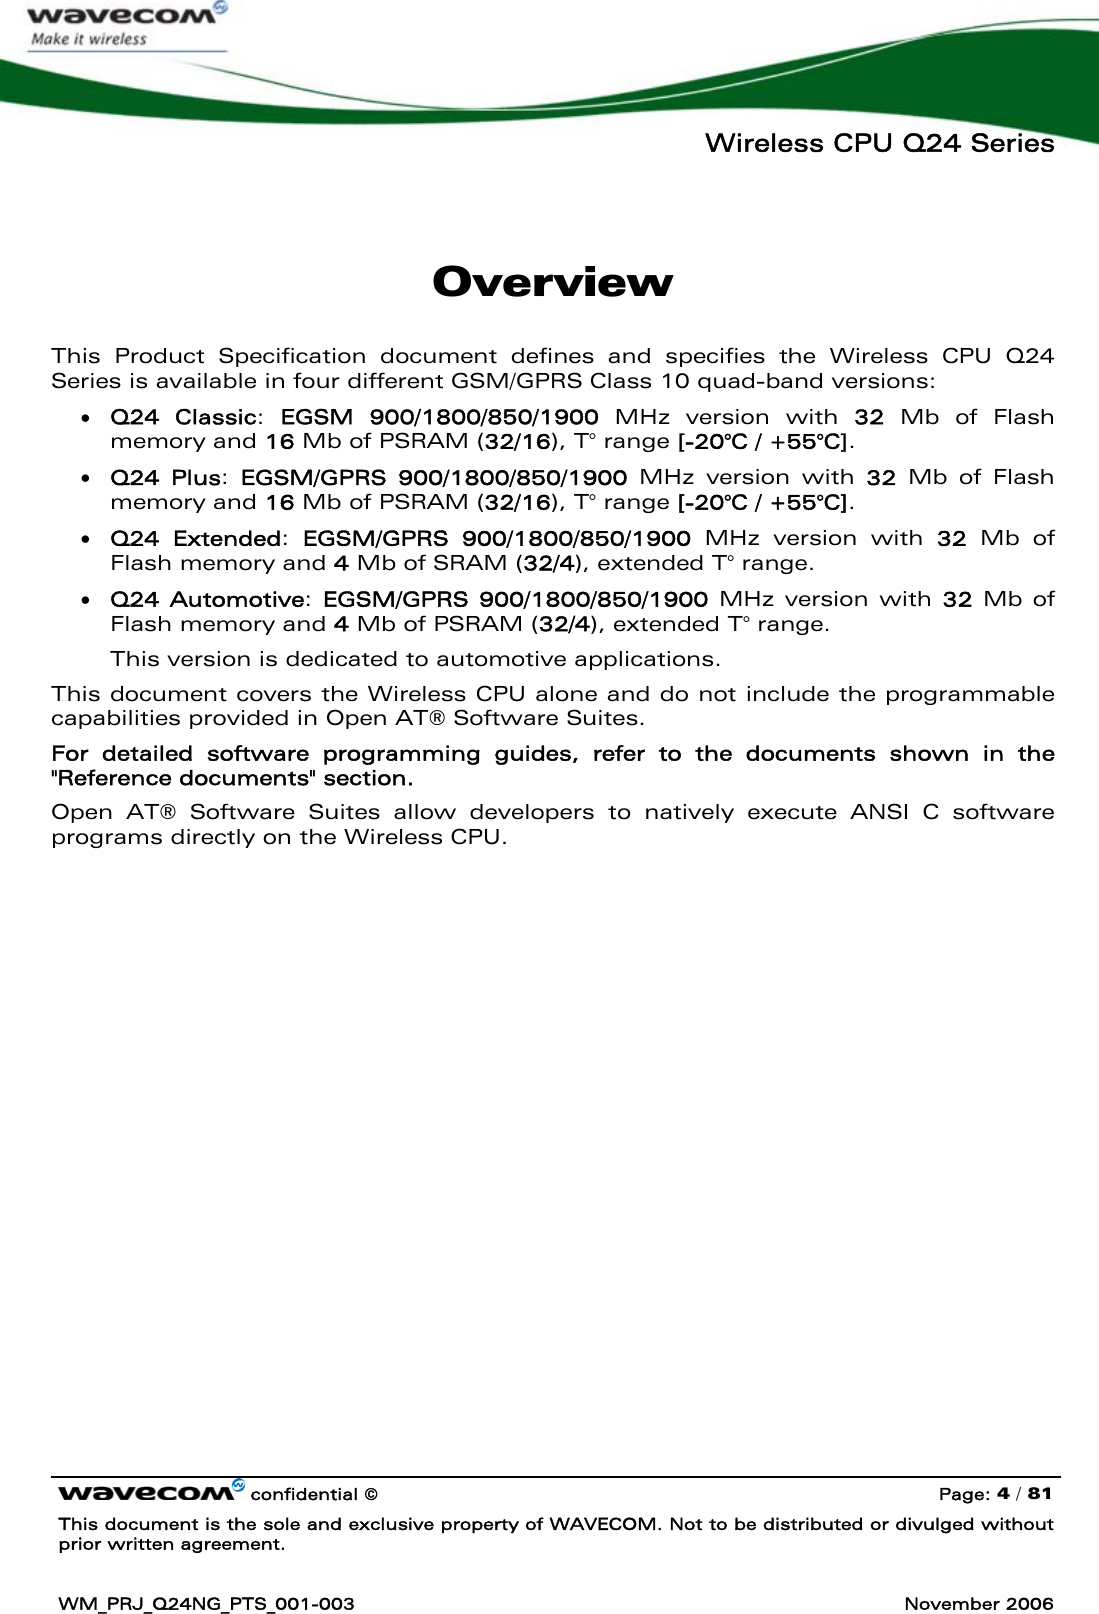   Wireless CPU Q24 Series   confidential © Page: 4 / 81 This document is the sole and exclusive property of WAVECOM. Not to be distributed or divulged without prior written agreement.  WM_PRJ_Q24NG_PTS_001-003  November 2006  Overview This Product Specification document defines and specifies the Wireless CPU Q24 Series is available in four different GSM/GPRS Class 10 quad-band versions: • Q24 Classic:  EGSM 900/1800/850/1900 MHz version with 32 Mb of Flash memory and 16 Mb of PSRAM (32/16), T° range [-20°C / +55°C]. • Q24 Plus:  EGSM/GPRS 900/1800/850/1900 MHz version with 32 Mb of Flash memory and 16 Mb of PSRAM (32/16), T° range [-20°C / +55°C]. • Q24 Extended:  EGSM/GPRS 900/1800/850/1900 MHz version with 32 Mb of Flash memory and 4 Mb of SRAM (32/4), extended T° range. • Q24 Automotive:  EGSM/GPRS 900/1800/850/1900 MHz version with 32 Mb of Flash memory and 4 Mb of PSRAM (32/4), extended T° range. This version is dedicated to automotive applications. This document covers the Wireless CPU alone and do not include the programmable capabilities provided in Open AT® Software Suites.  For detailed software programming guides, refer to the documents shown in the &quot;Reference documents&quot; section. Open AT® Software Suites allow developers to natively execute ANSI C software programs directly on the Wireless CPU. 